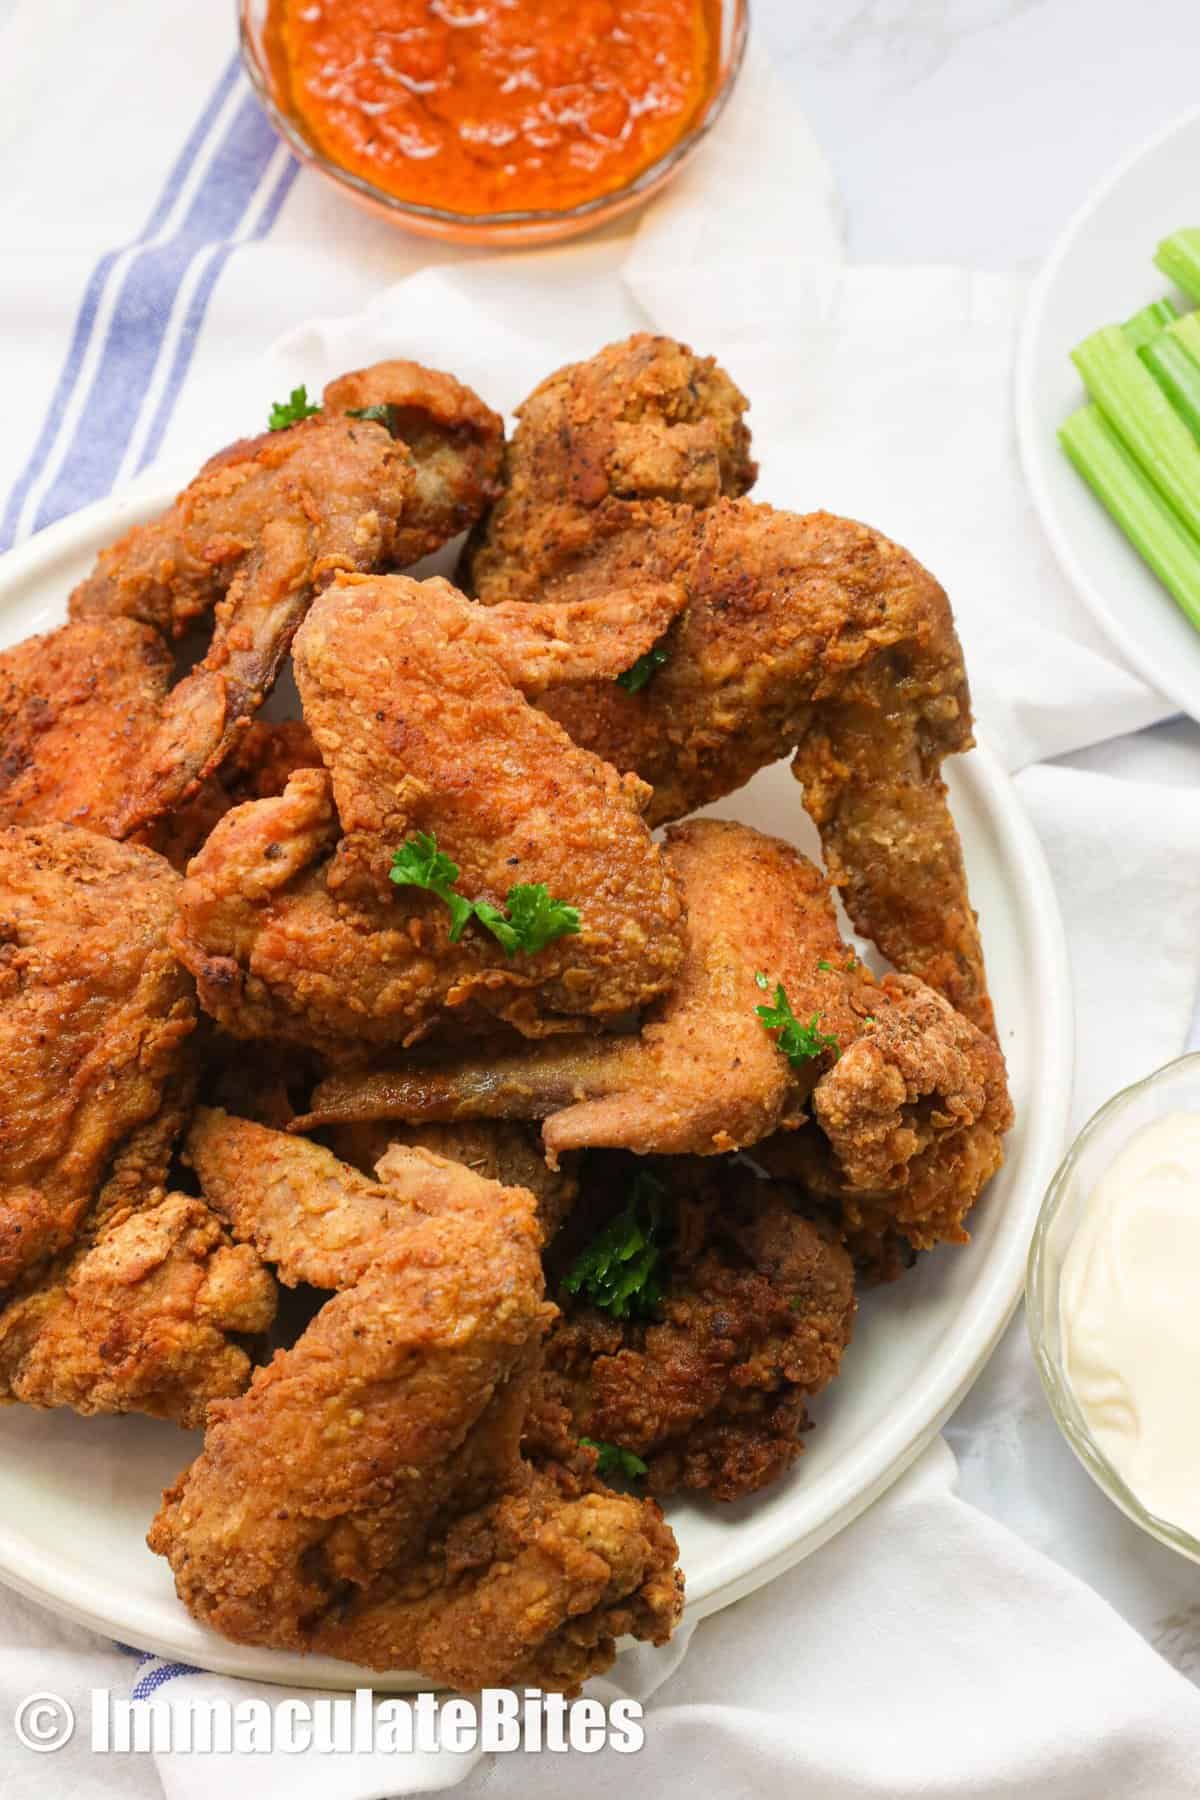 Fried Chicken Wings - Immaculate Bites